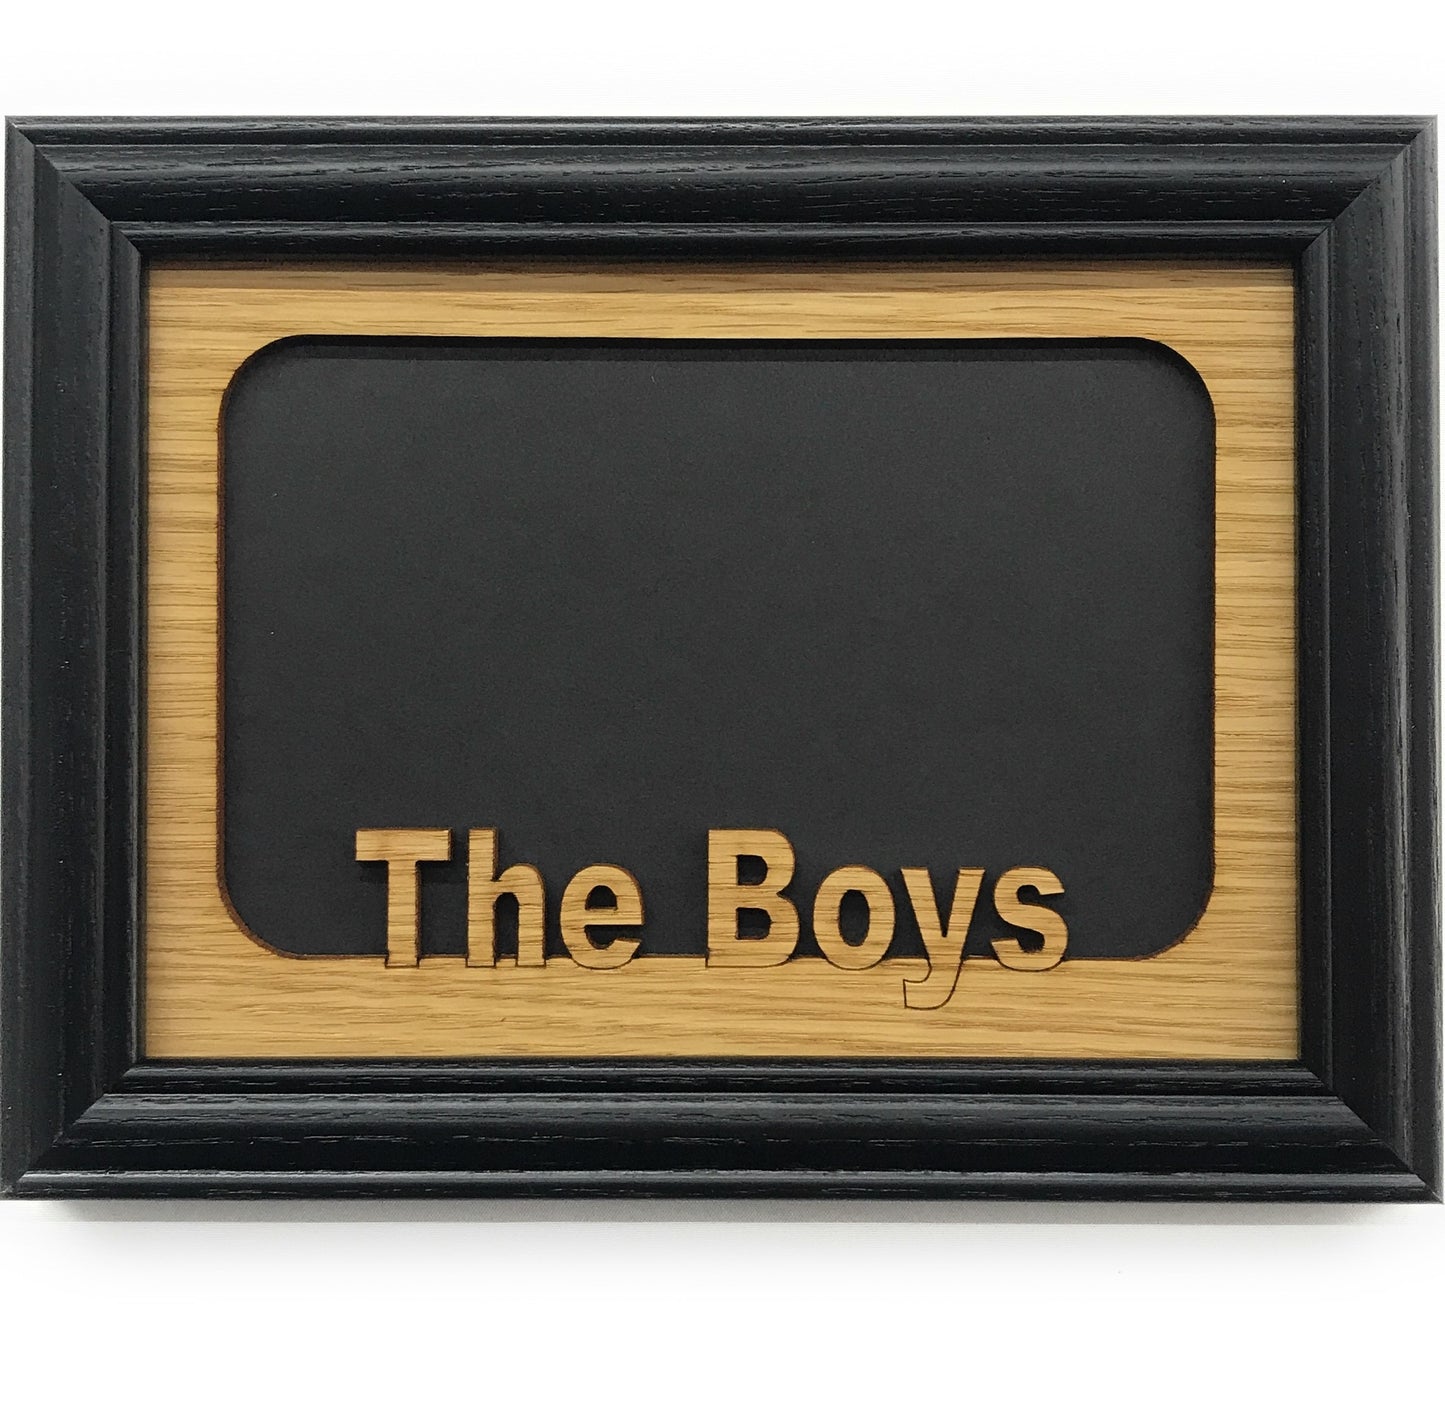 The Boys Picture Frame - 5x7 Frame Hold 4x6 Photo